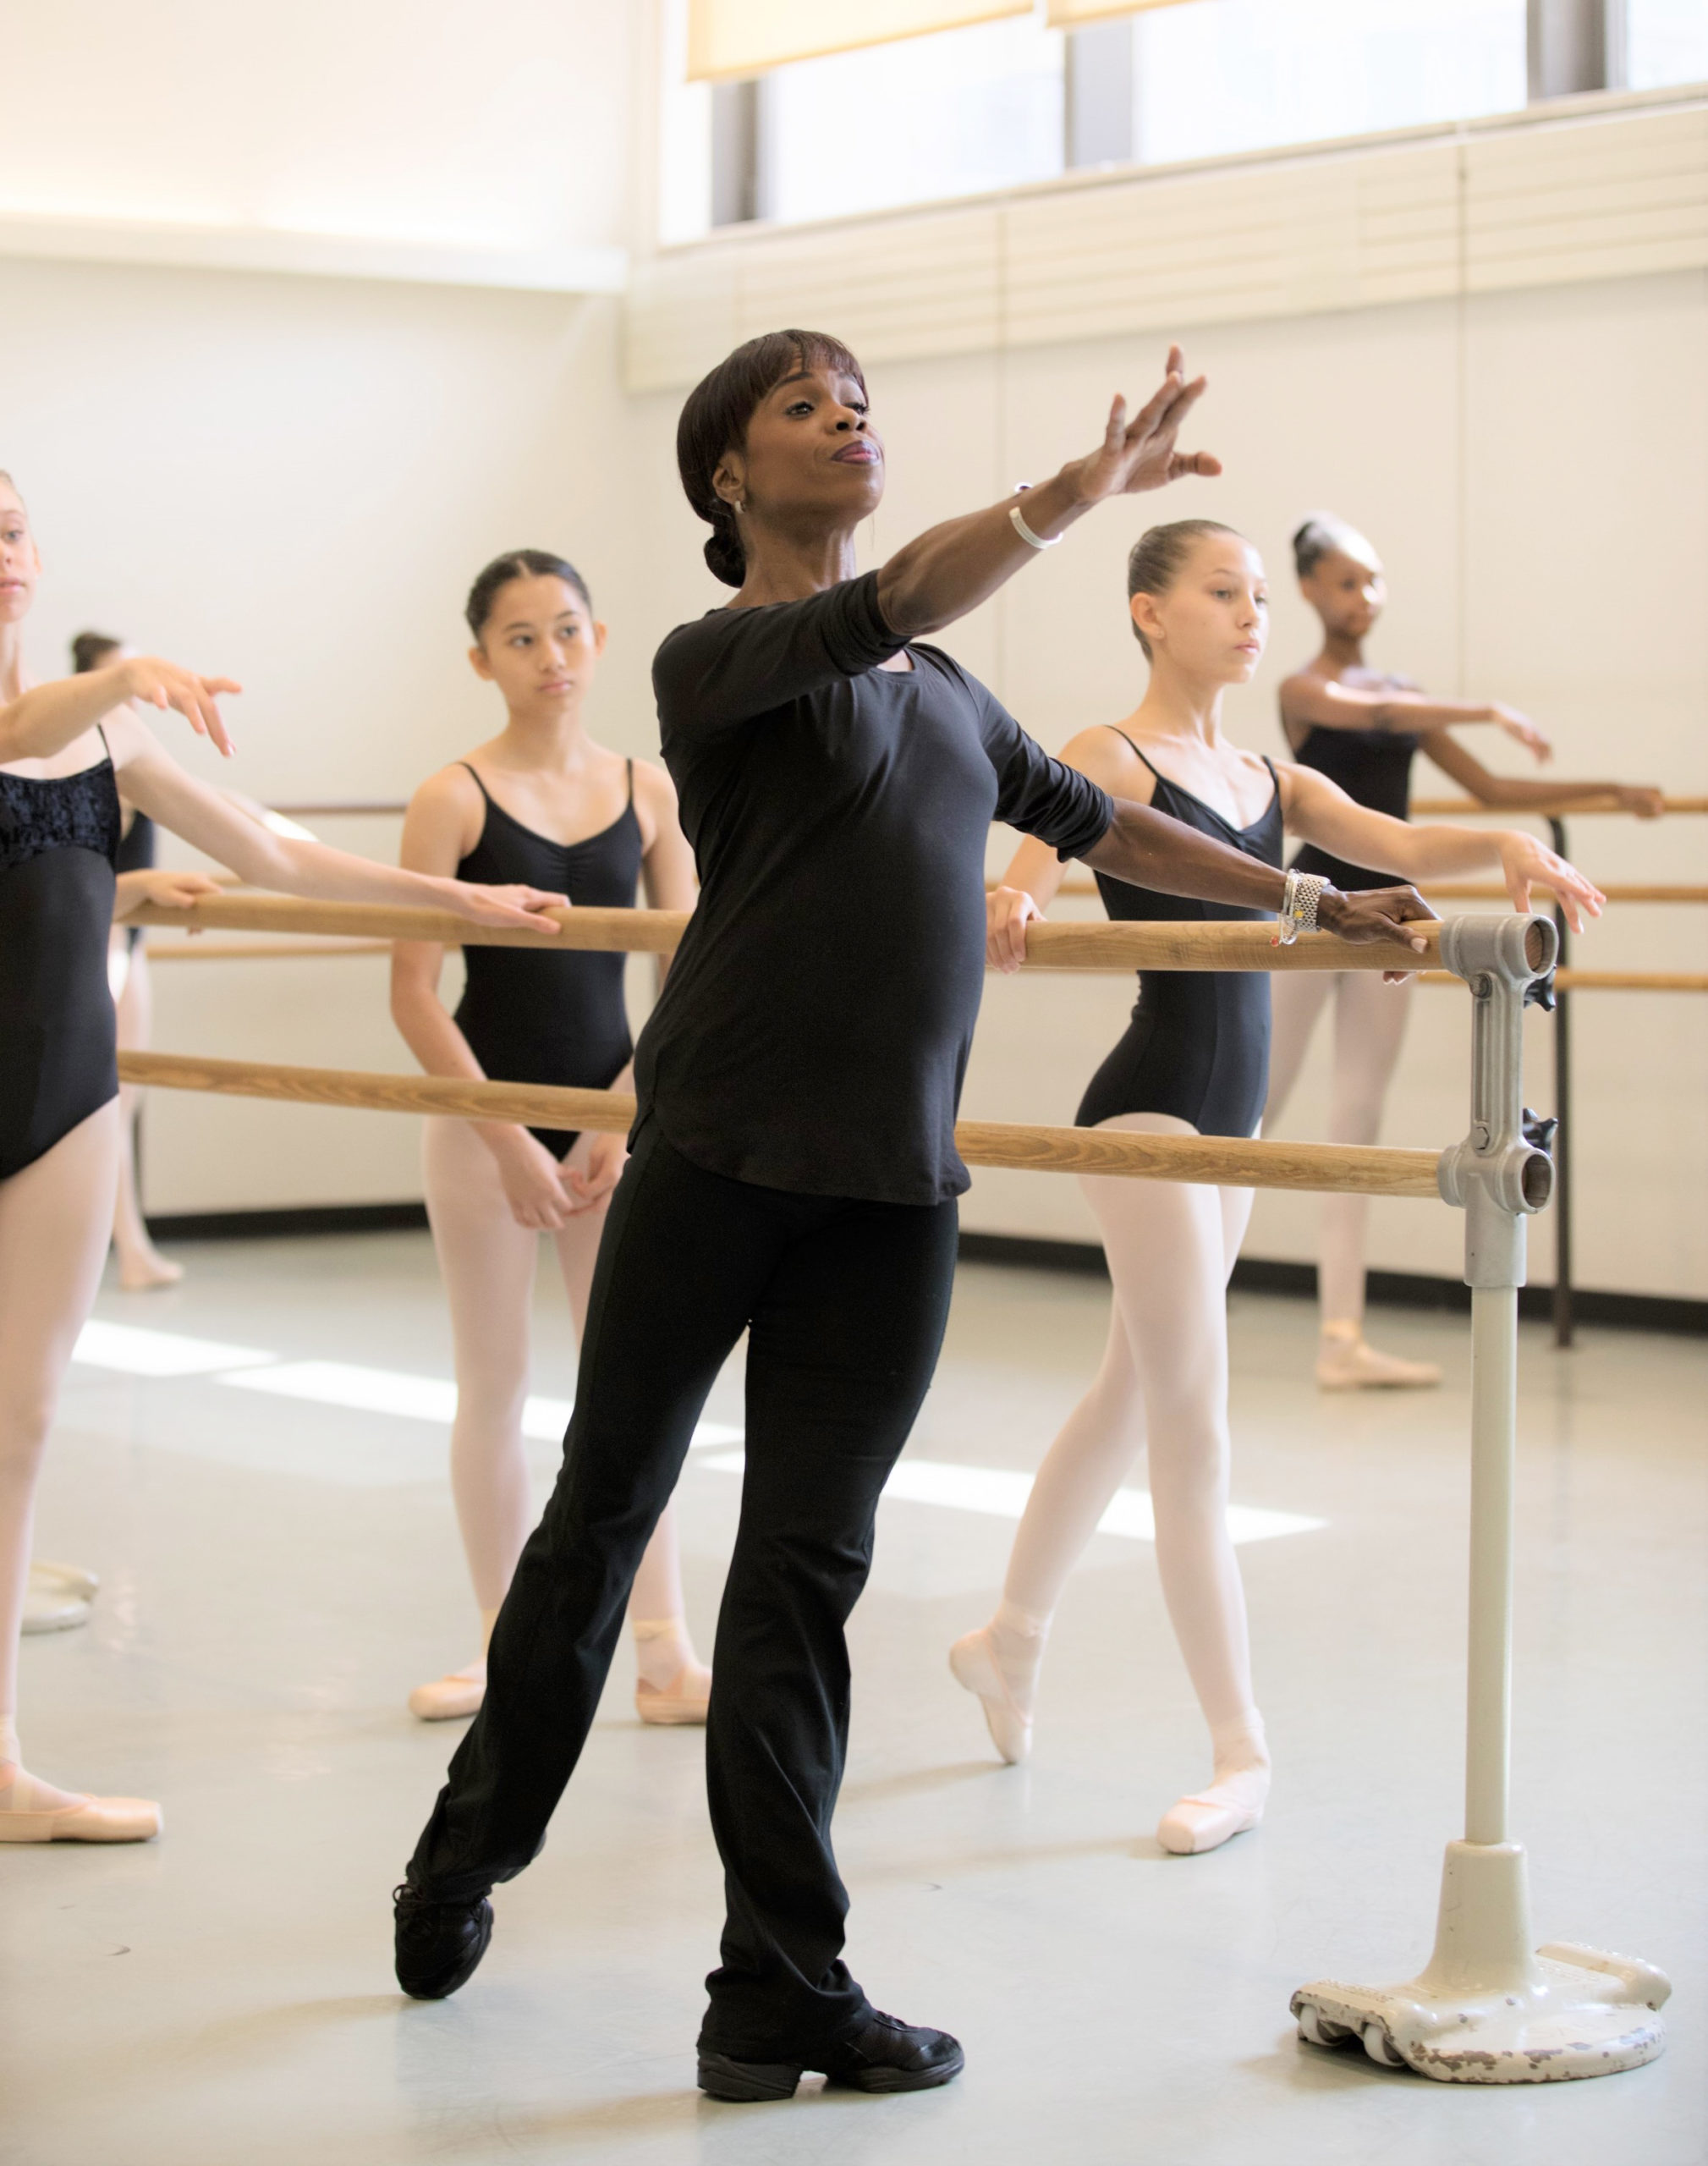 Andrea Long, a tall Black woman wearing black sweats, dance sneakers, and shirt, stands at barre, demonstrating a tendu back, working arm extended forward in arabesque. Students in pink tights and black leotards watch and follow along.